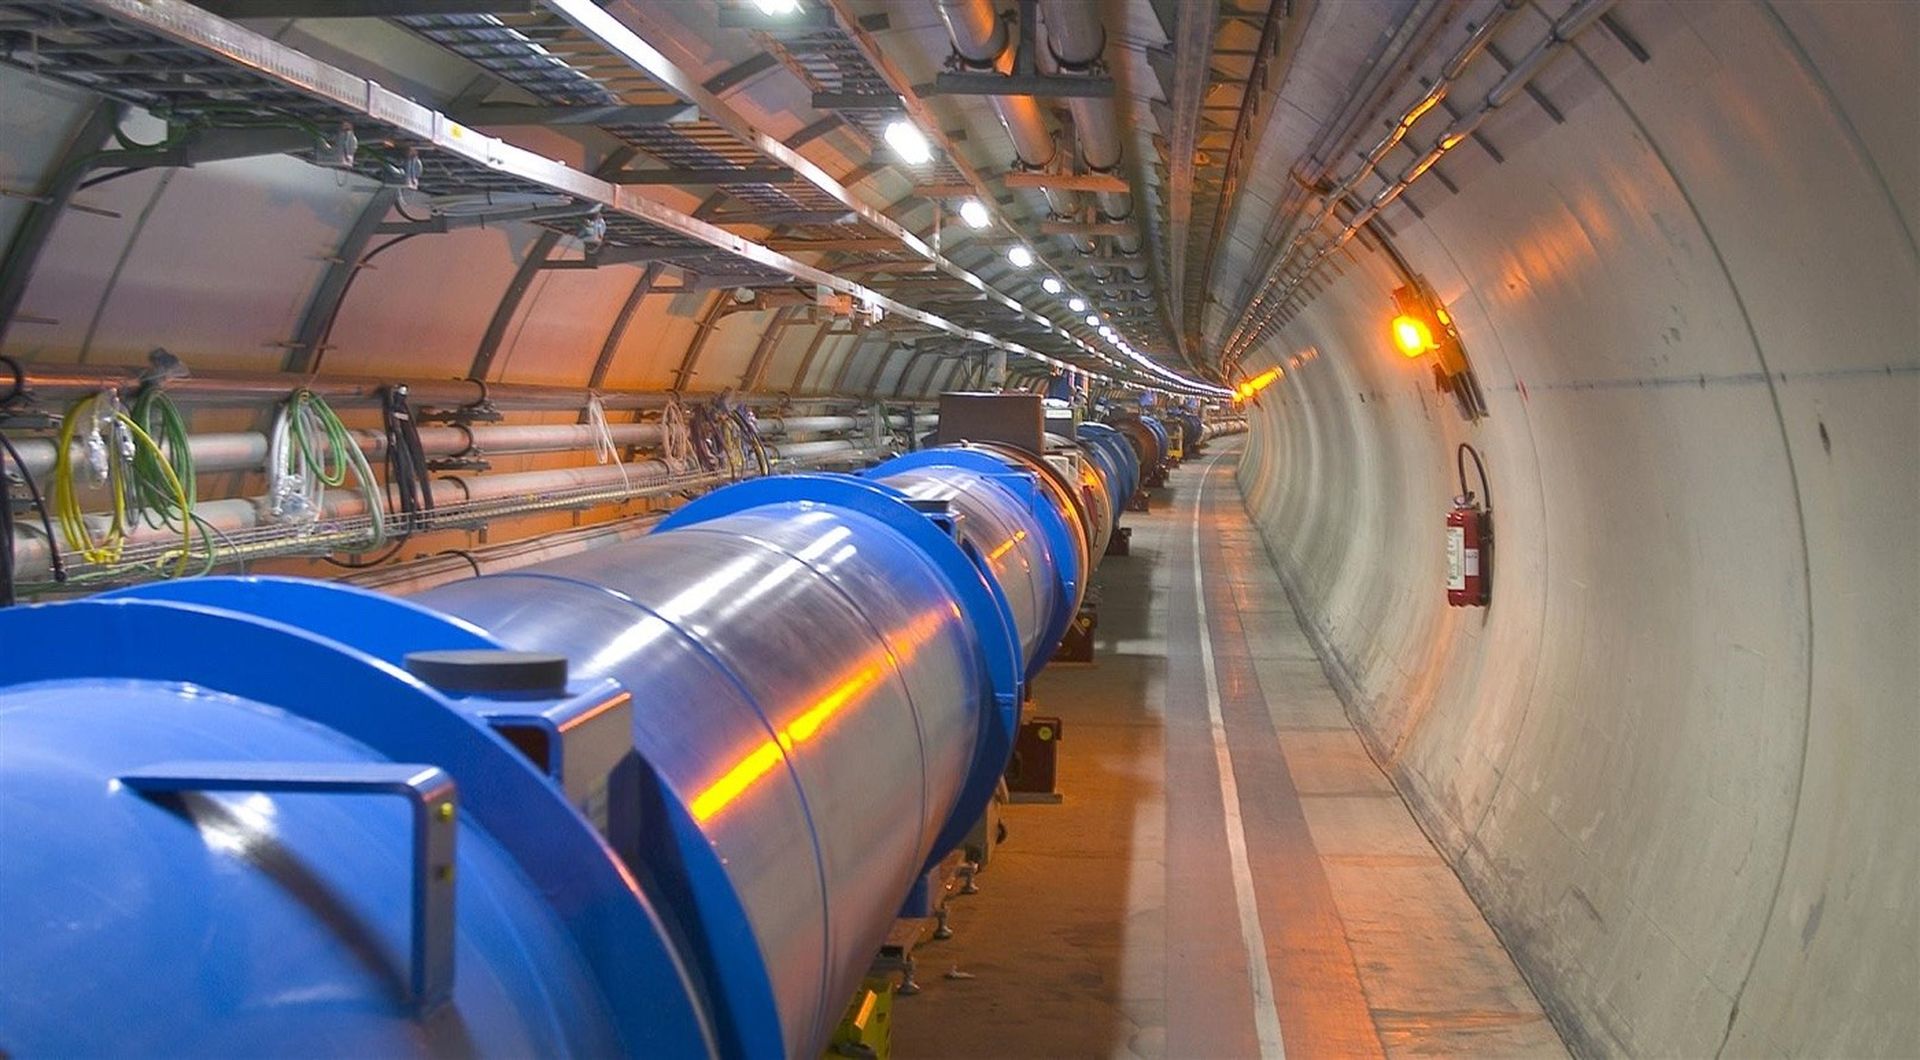 A lot of people have been asking what time is CERN being turned on. The Large Hadron Collider (LHC) experiment will resume data collection after three years of being shut down for maintenance and upgrading work.